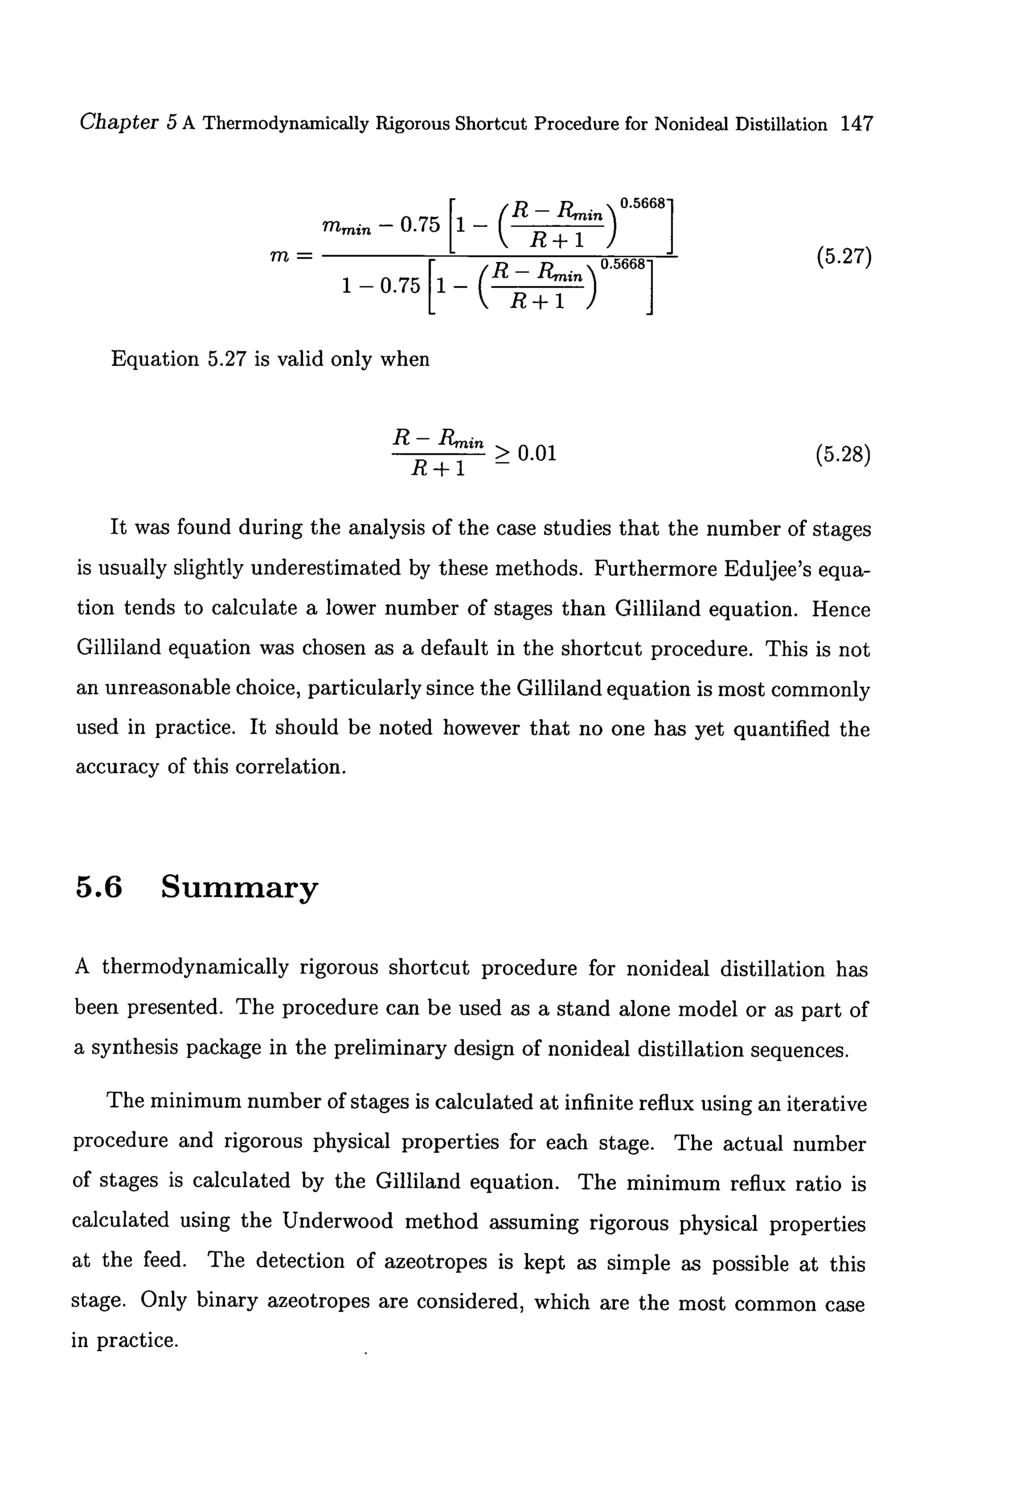 Chapter 5 A Thermodynamically Rigorous Shortcut Procedure for Nonideal Distillation 147 F mmjn - 0.75 [1_ m= ( R 1 -. 0. 75 Equation 5.27 is valid only when El - R+1) IR - R+ 1 ) - Rmin 0.56681 j 0.